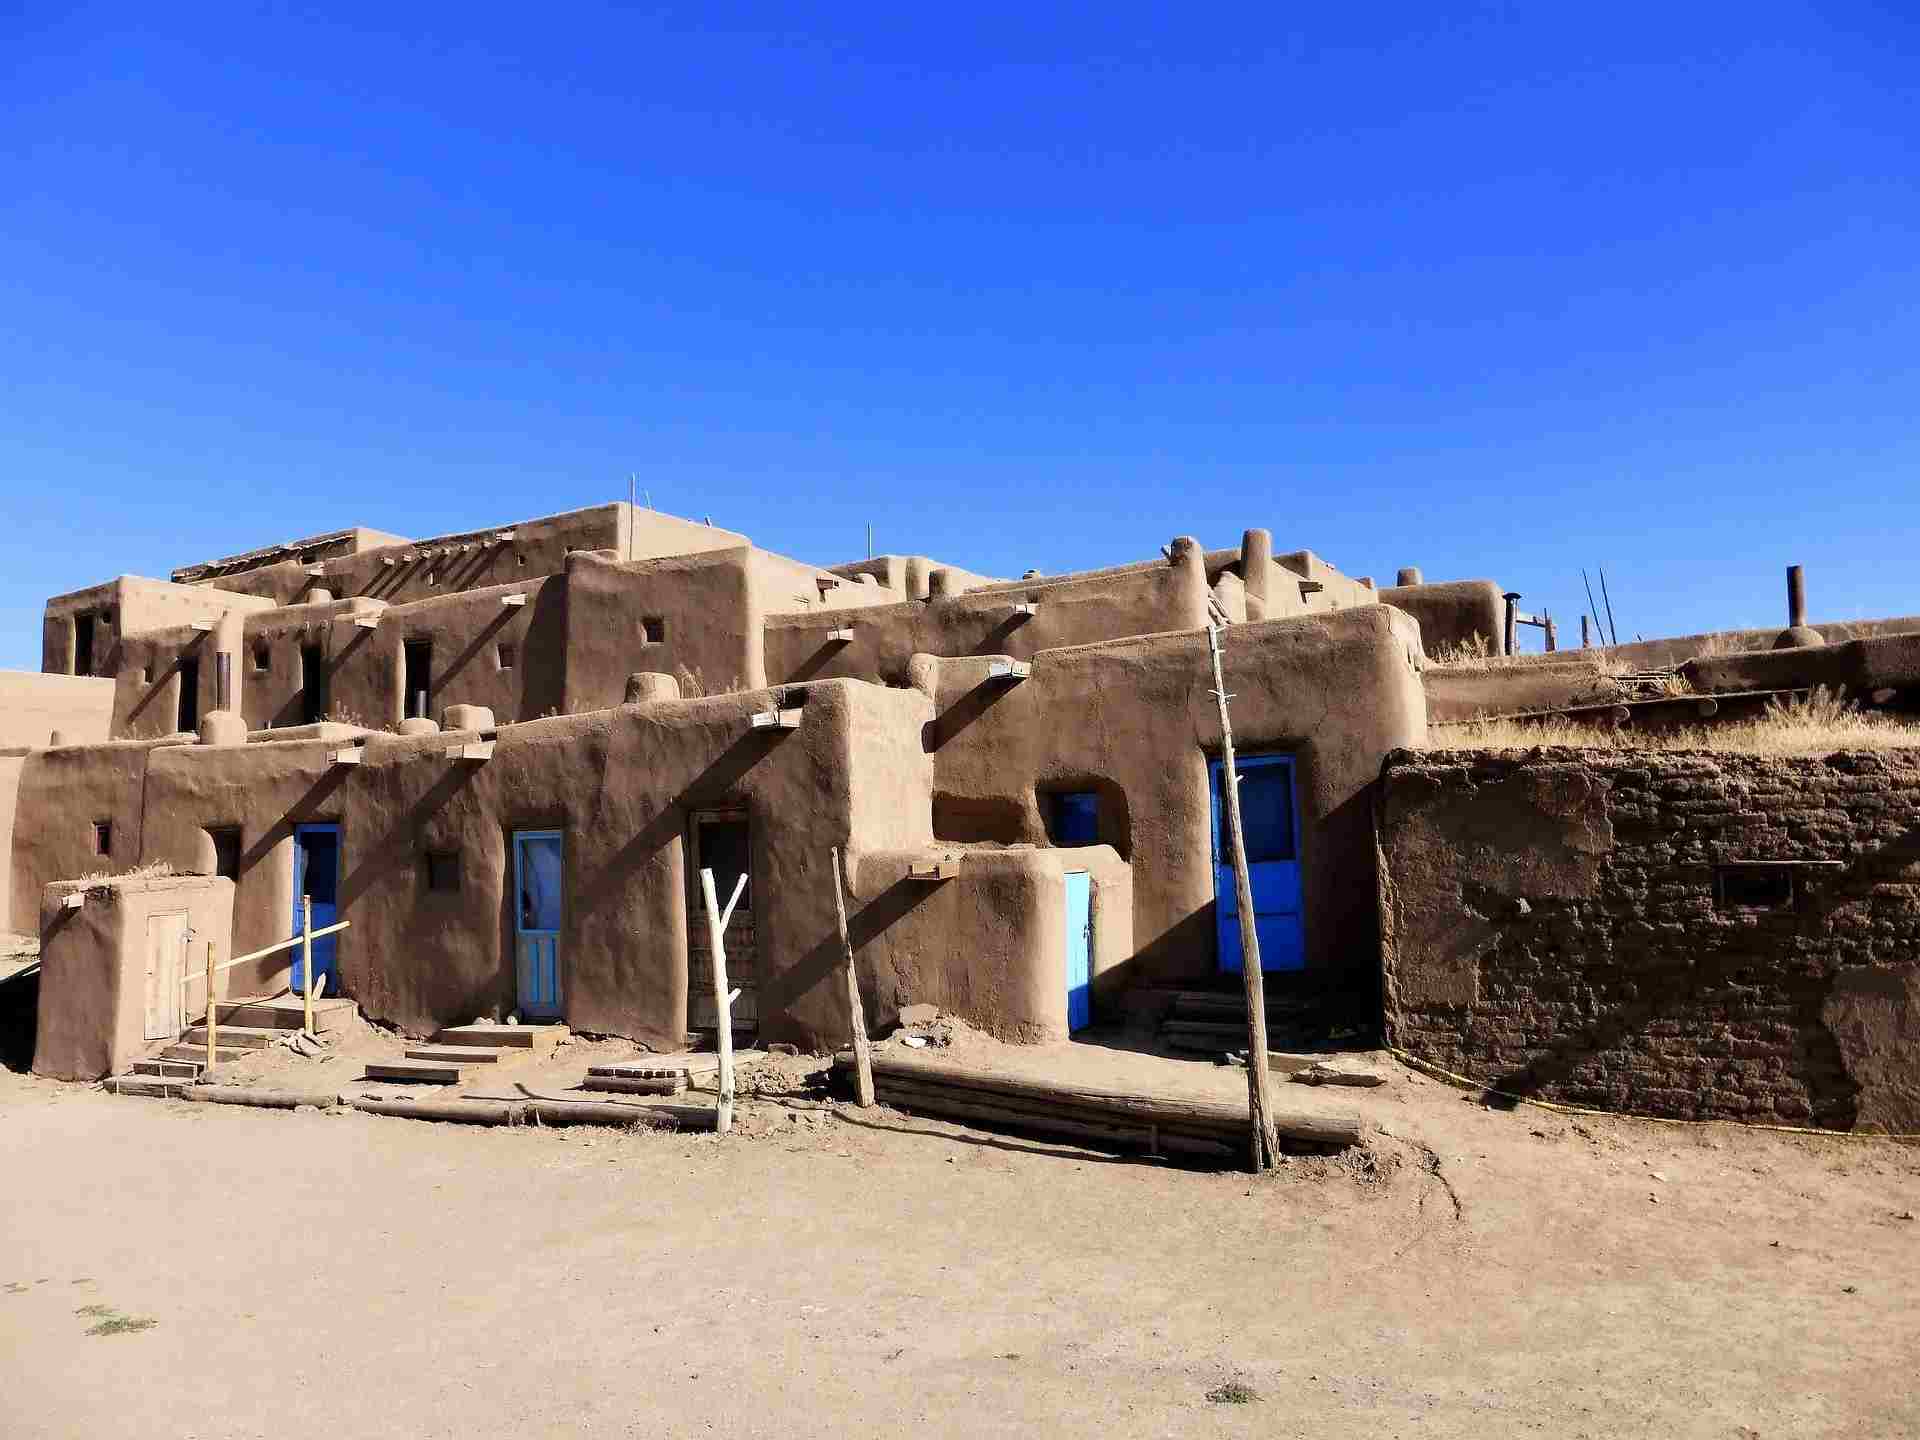 How was the life of ancient Puebloan people?